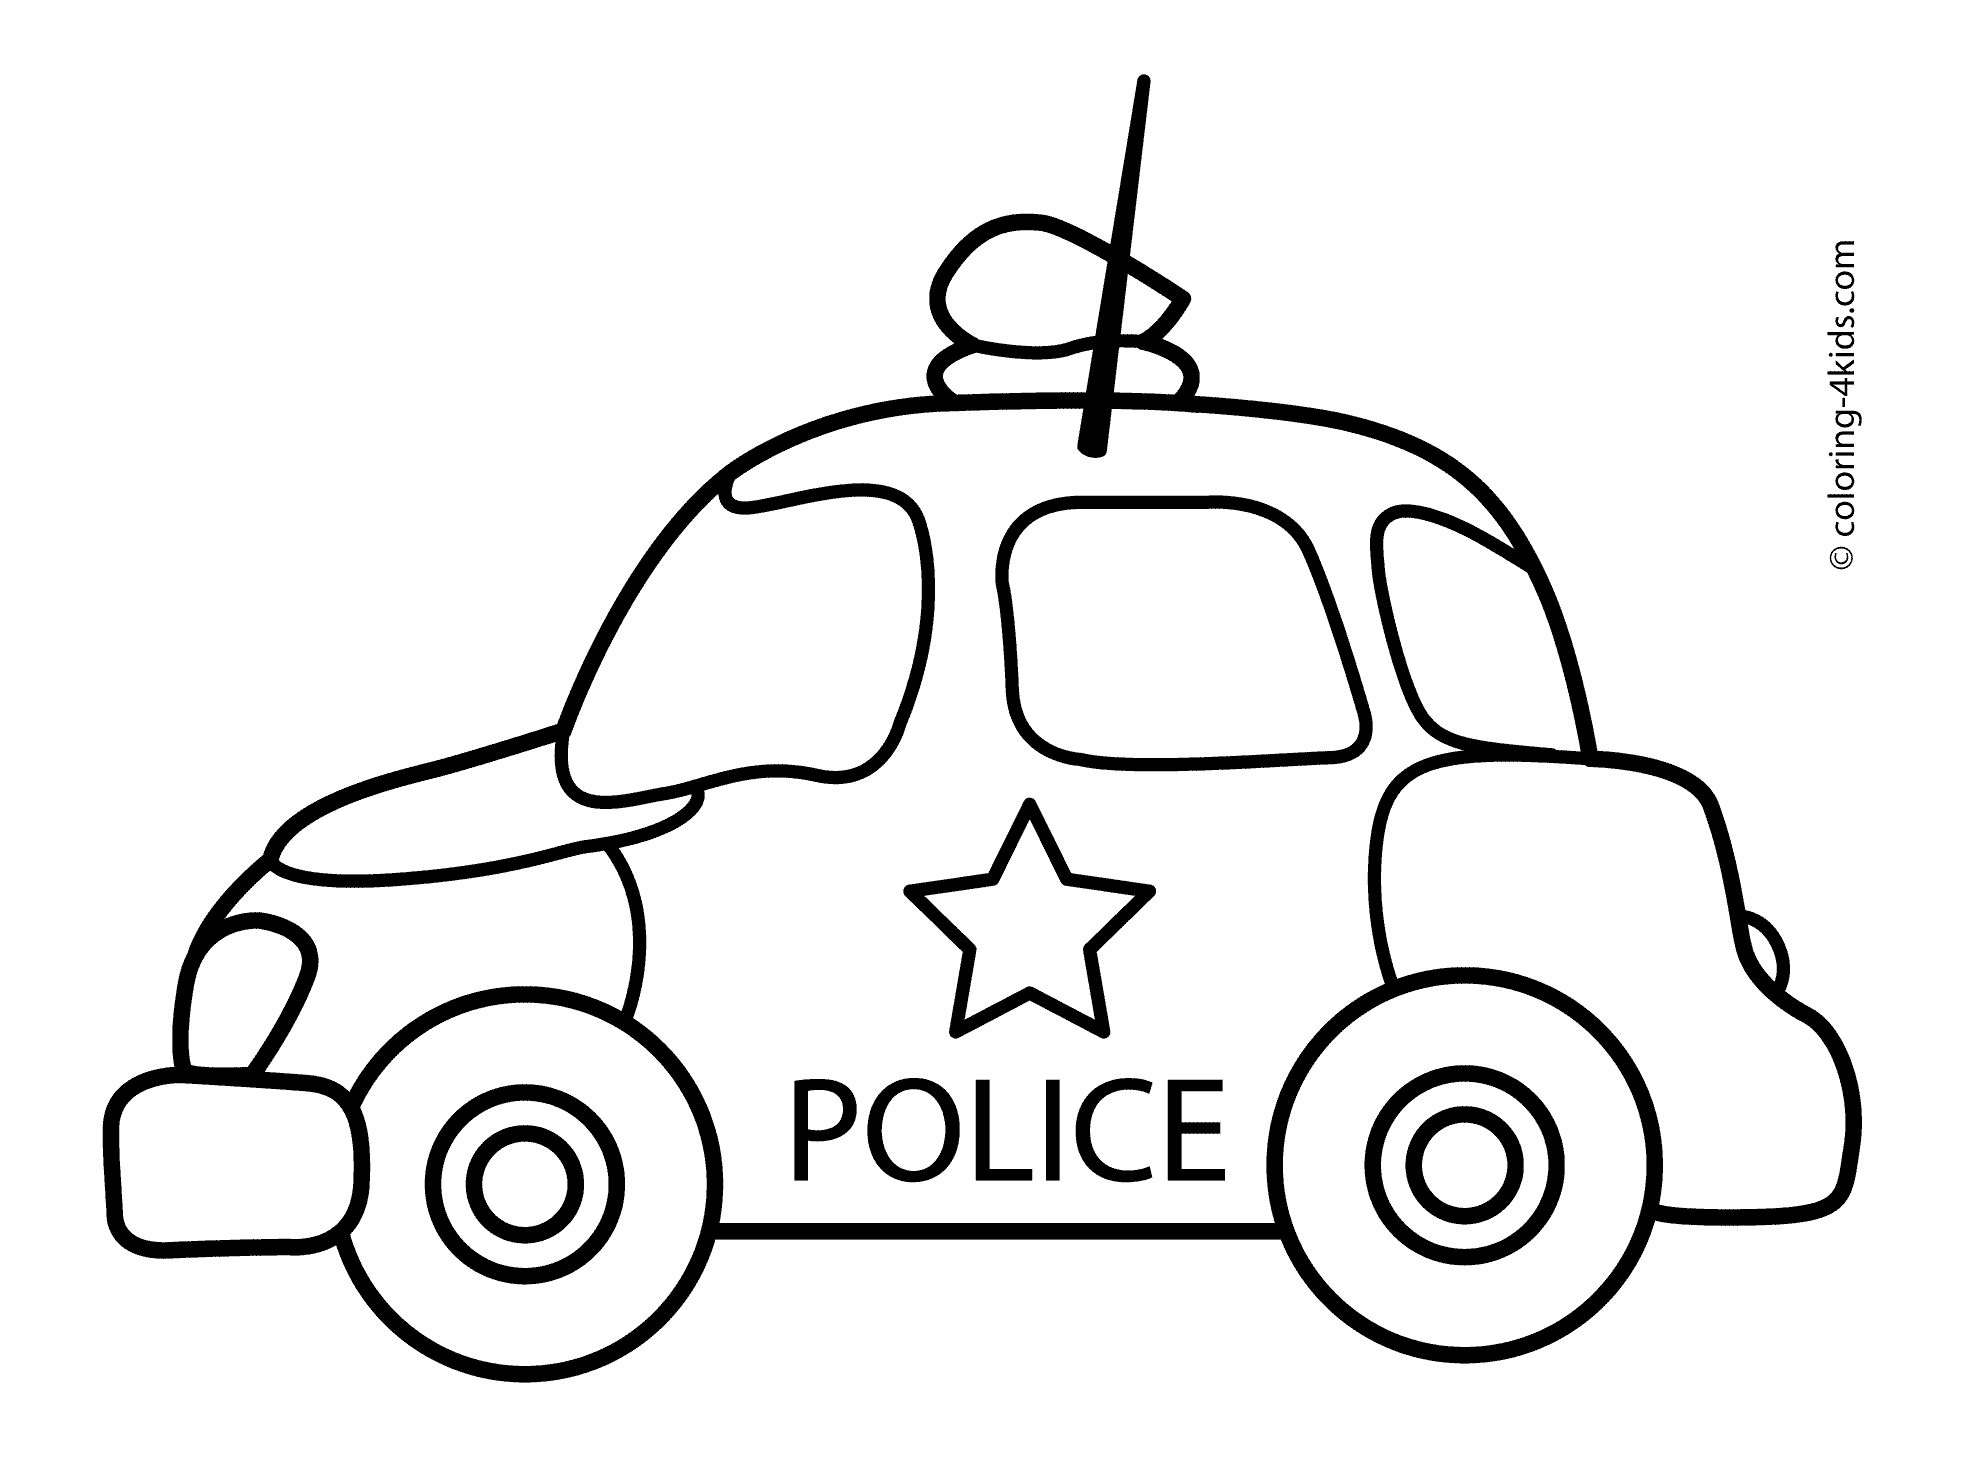 Police Car Coloring Pages To Print   Coloring Home